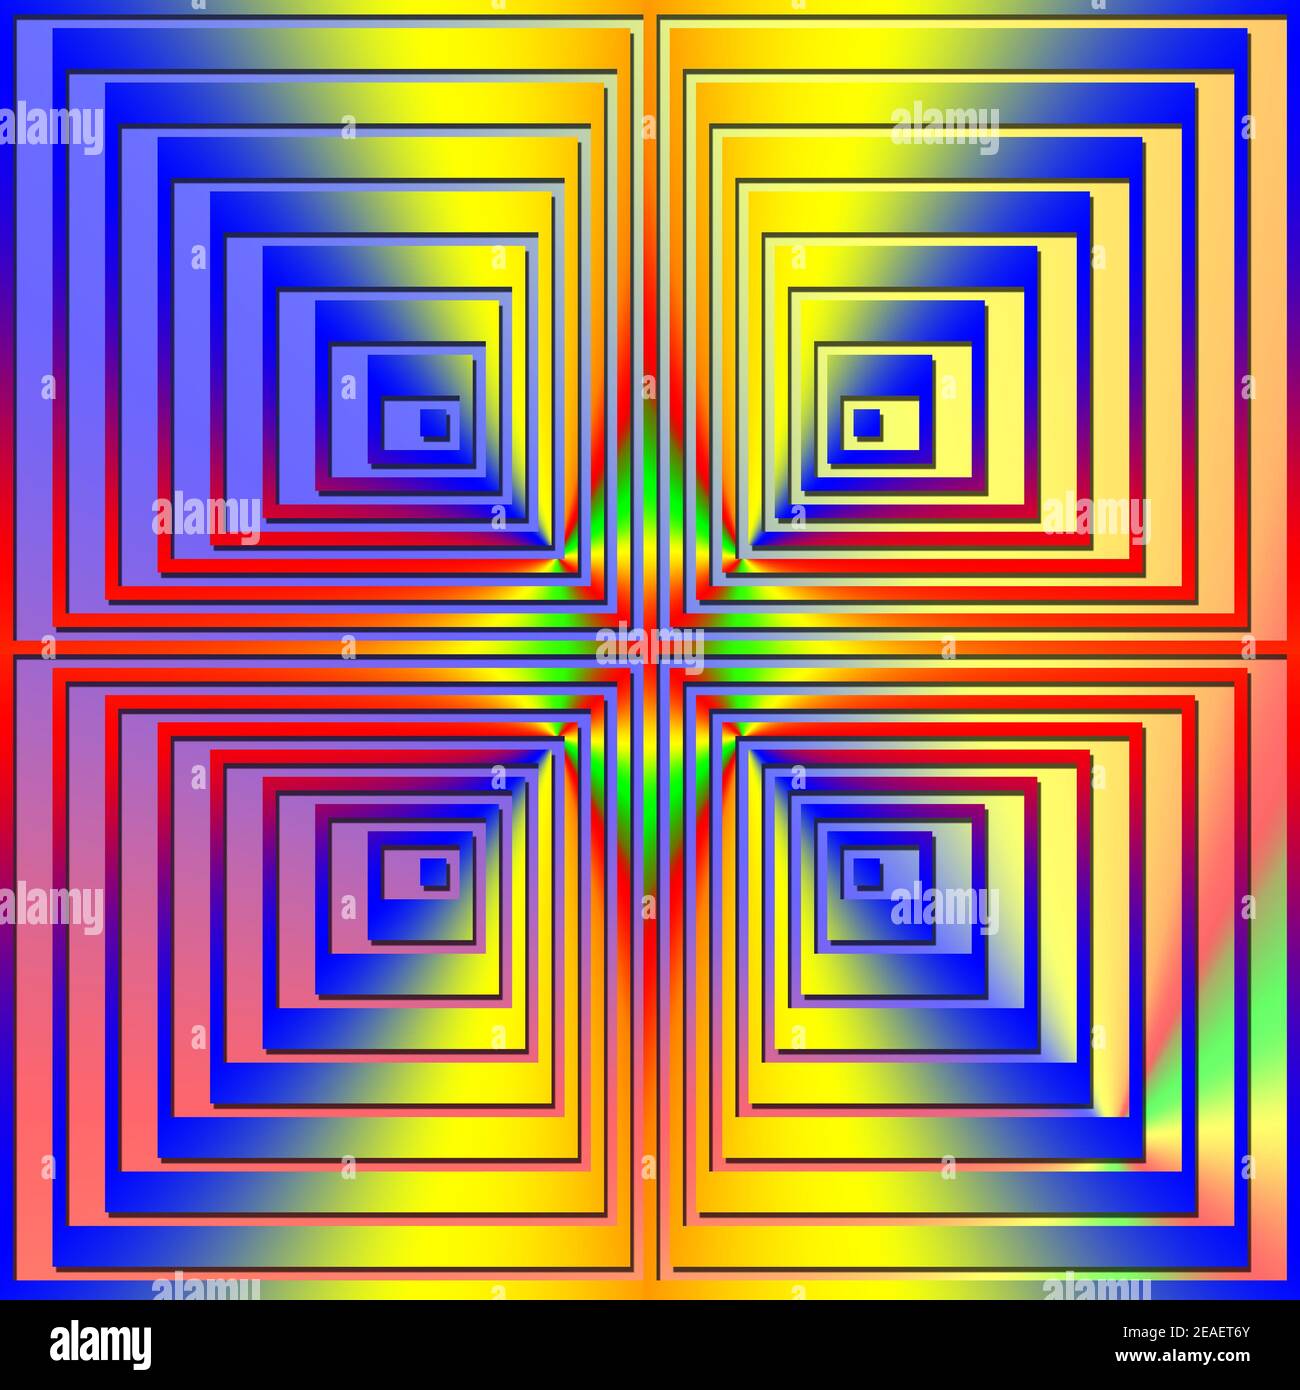 3D graphic illustration - star image optical illusion made from 3D rainbow-coloured squares Stock Photo